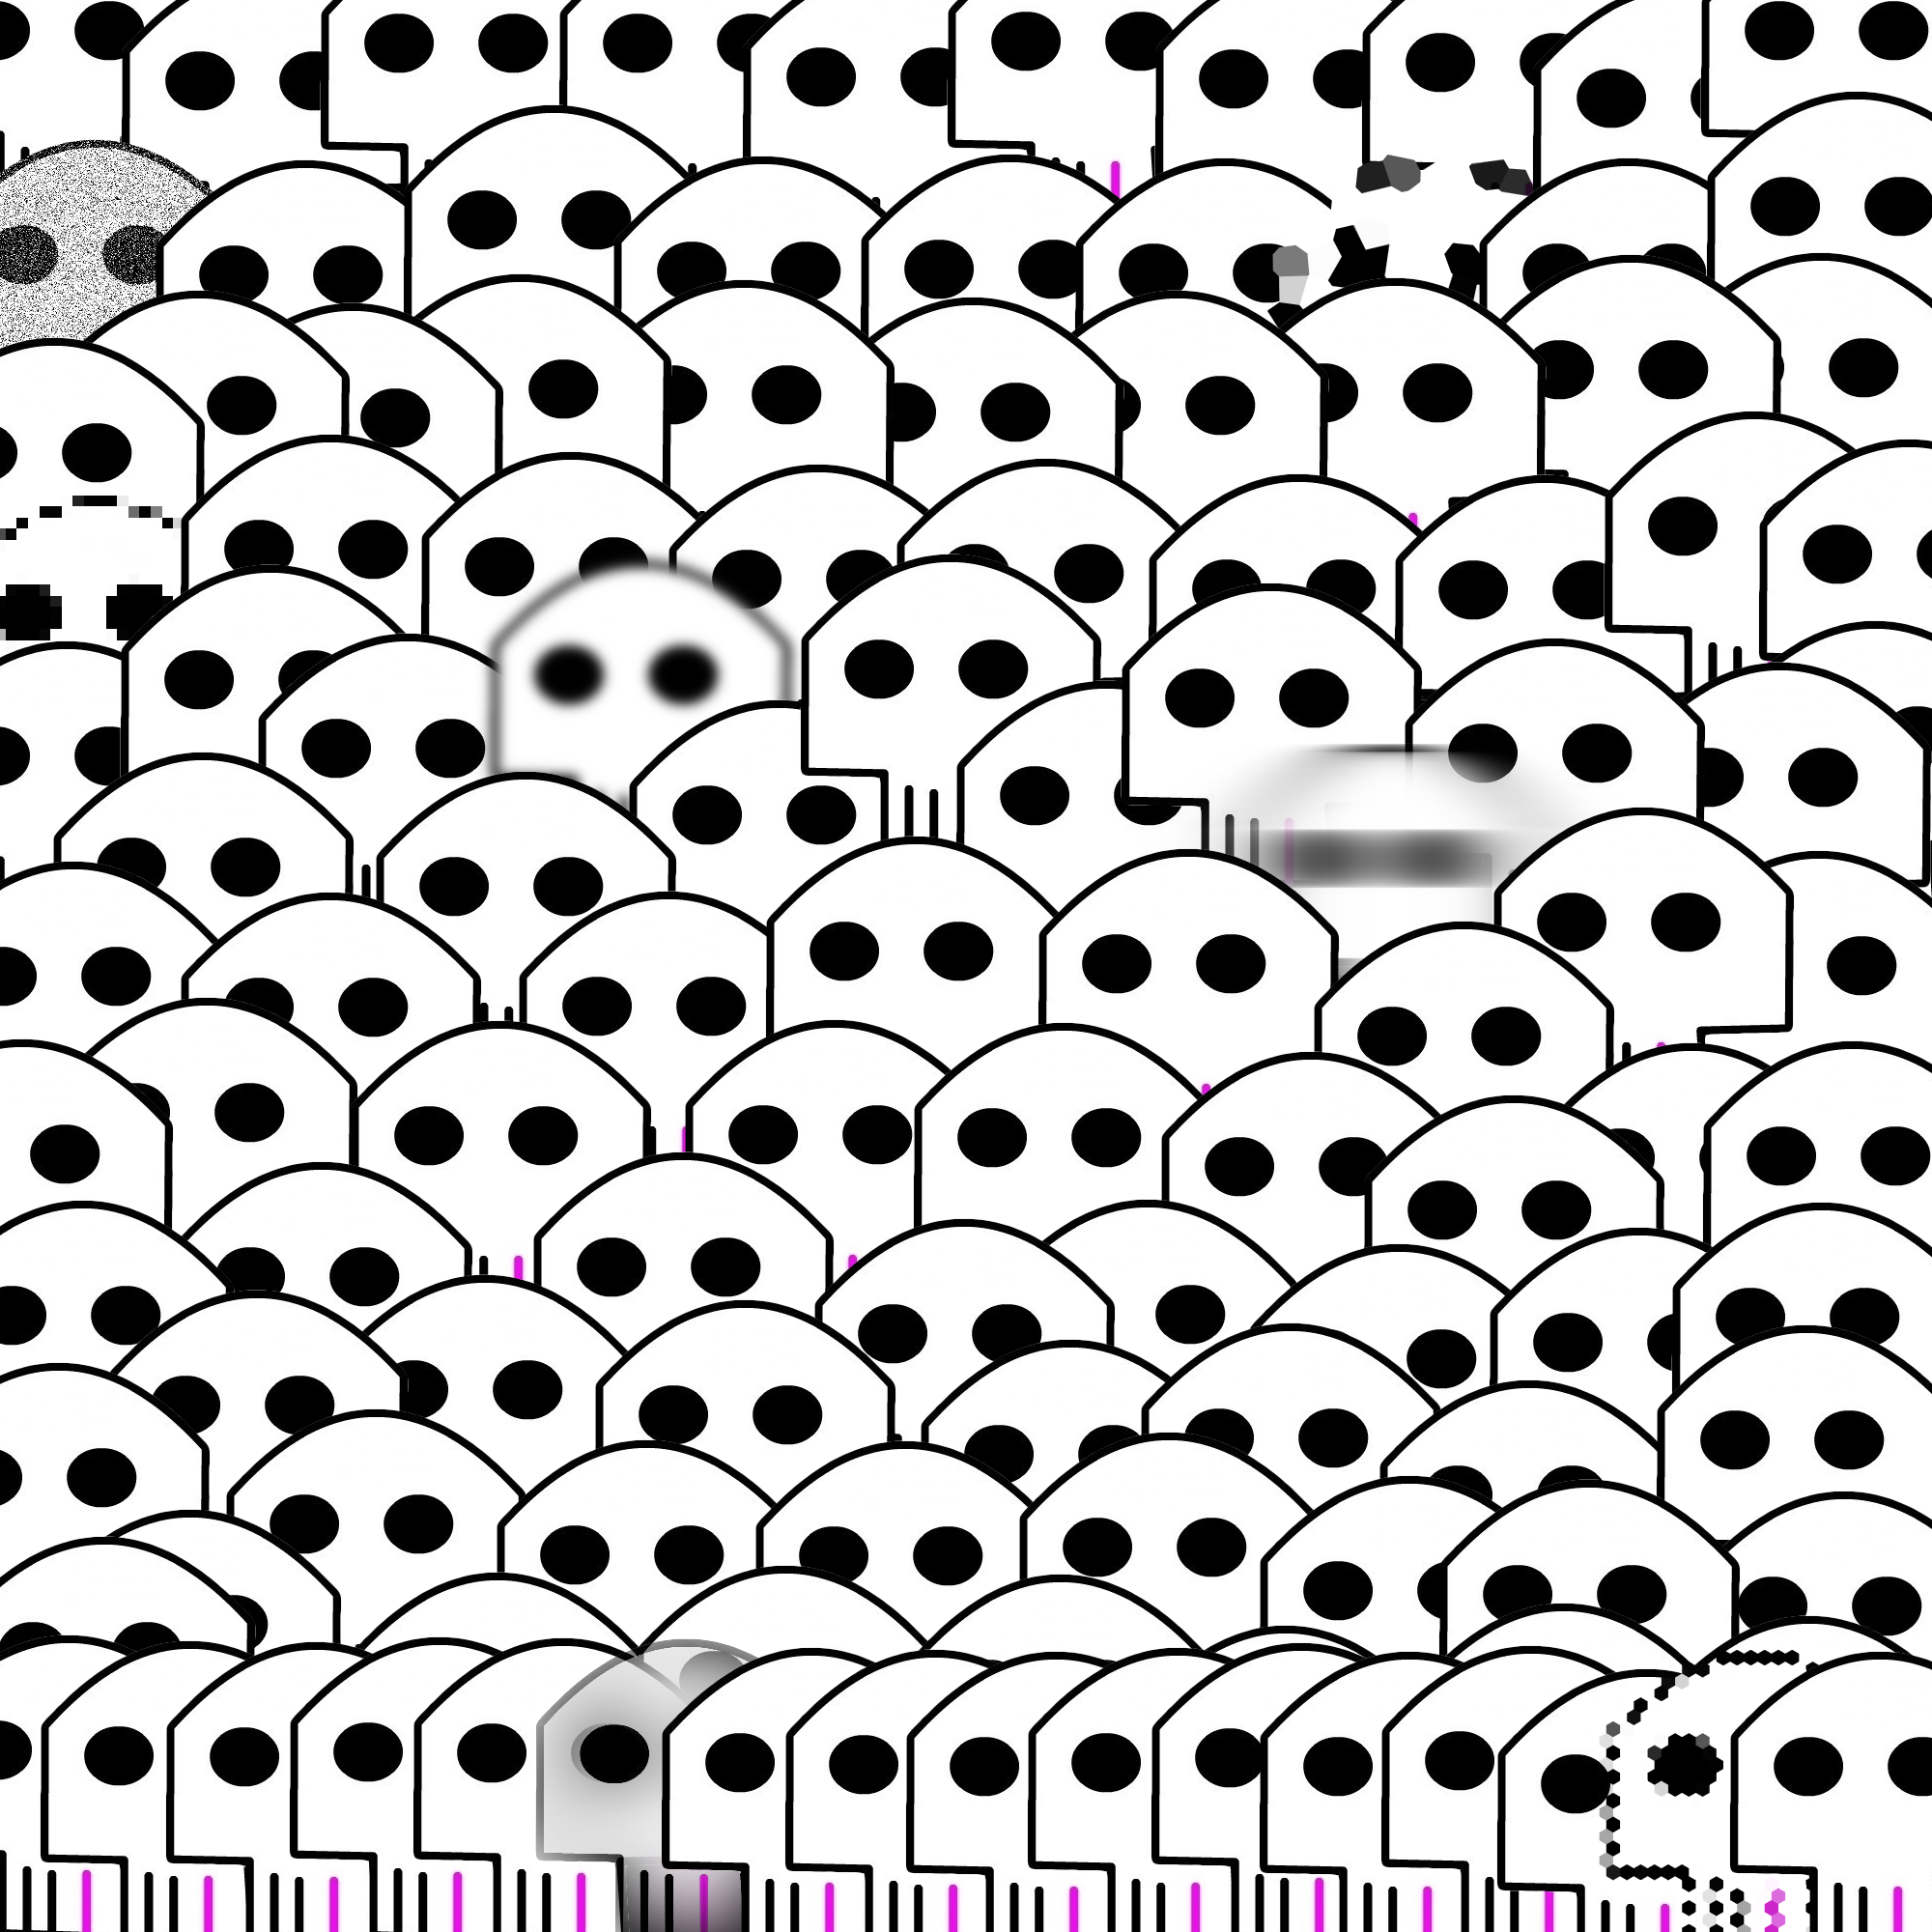 A plethora of simple cartoon skulls with a blurry one and couple other pixelated ones arranged some kind of bizarre seek and find puzzle.